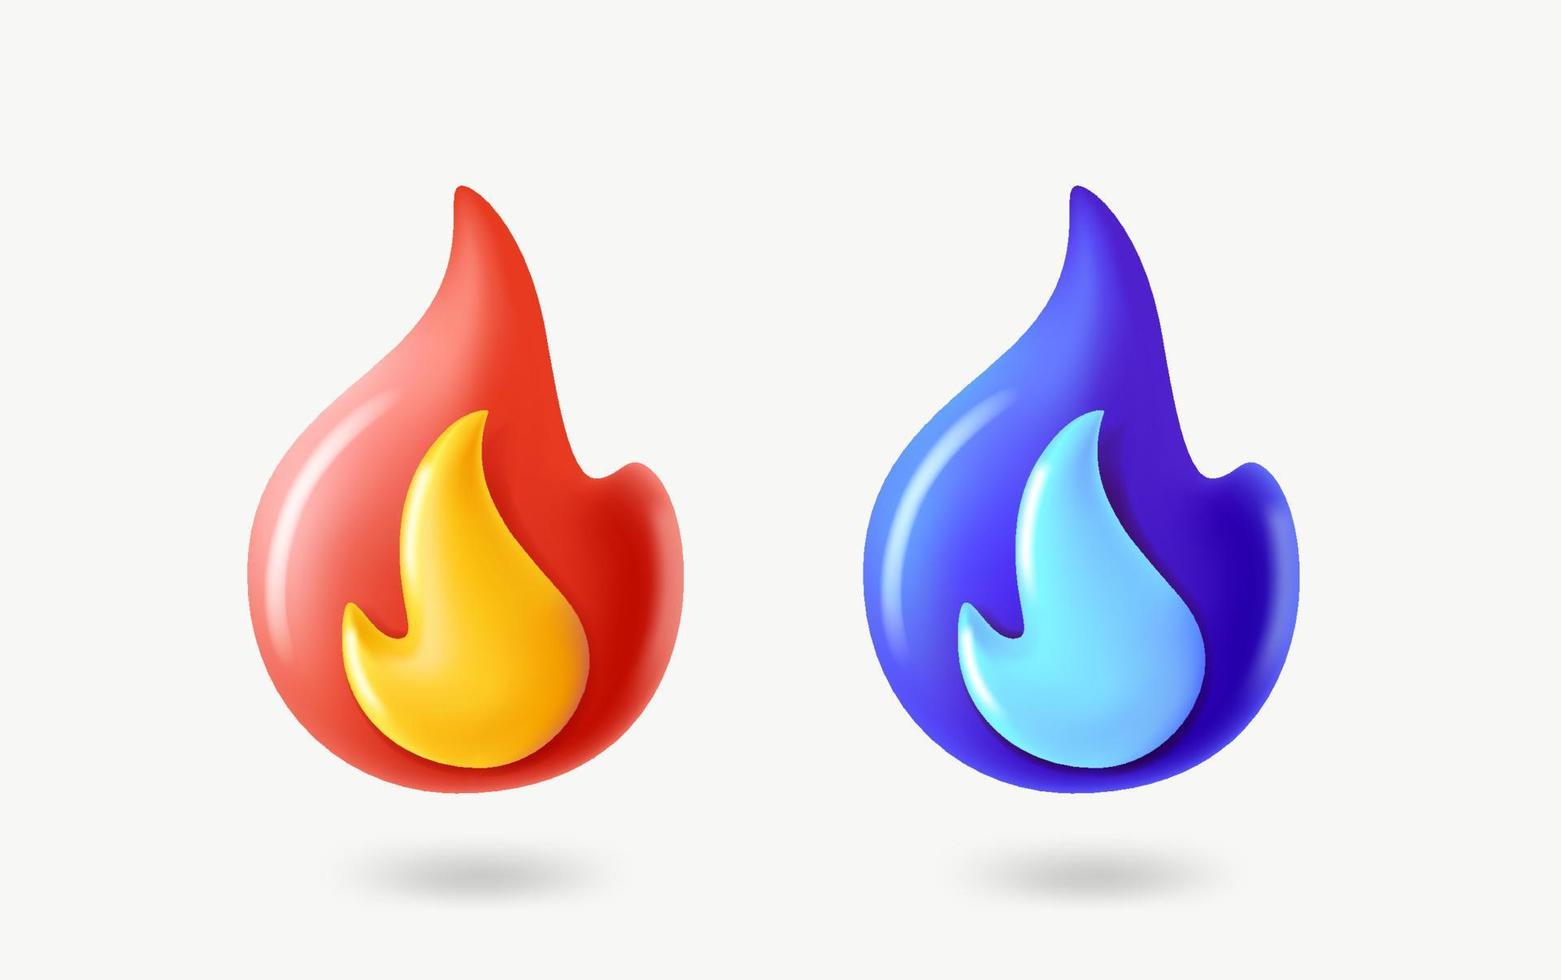 Red and blue flames icons set. 3d vector clipart